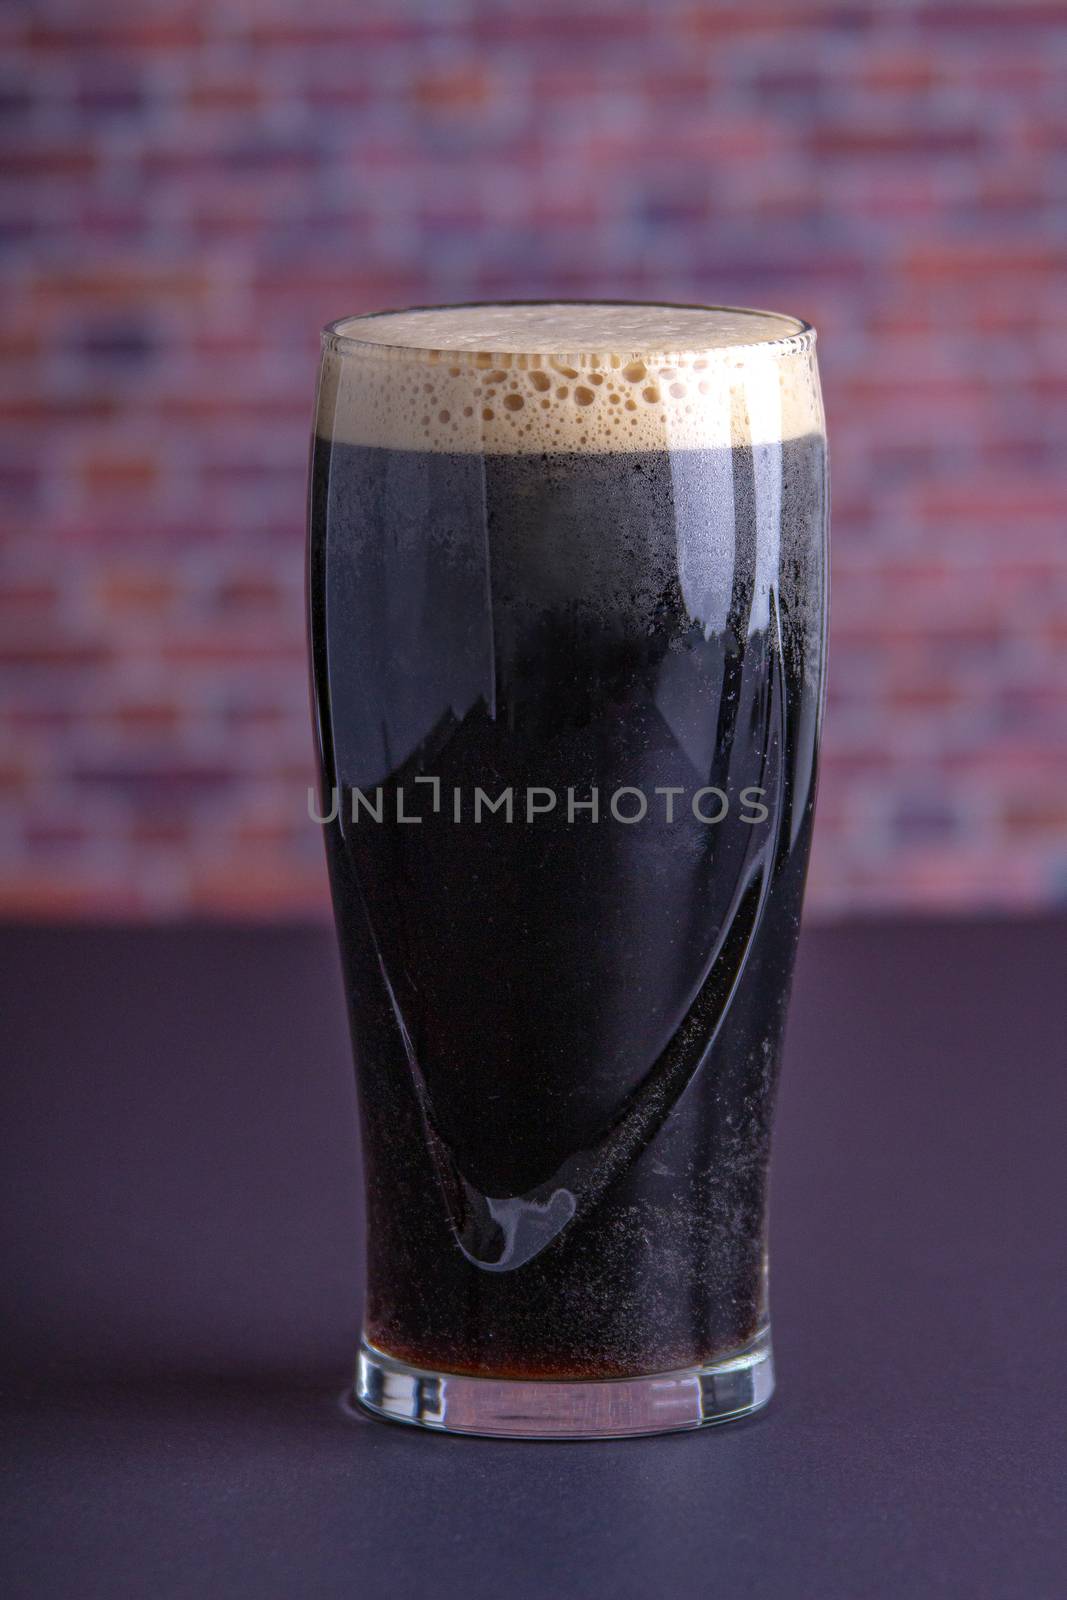 A Guinness dark Irish dry stout beer glass that originated in th by oasisamuel